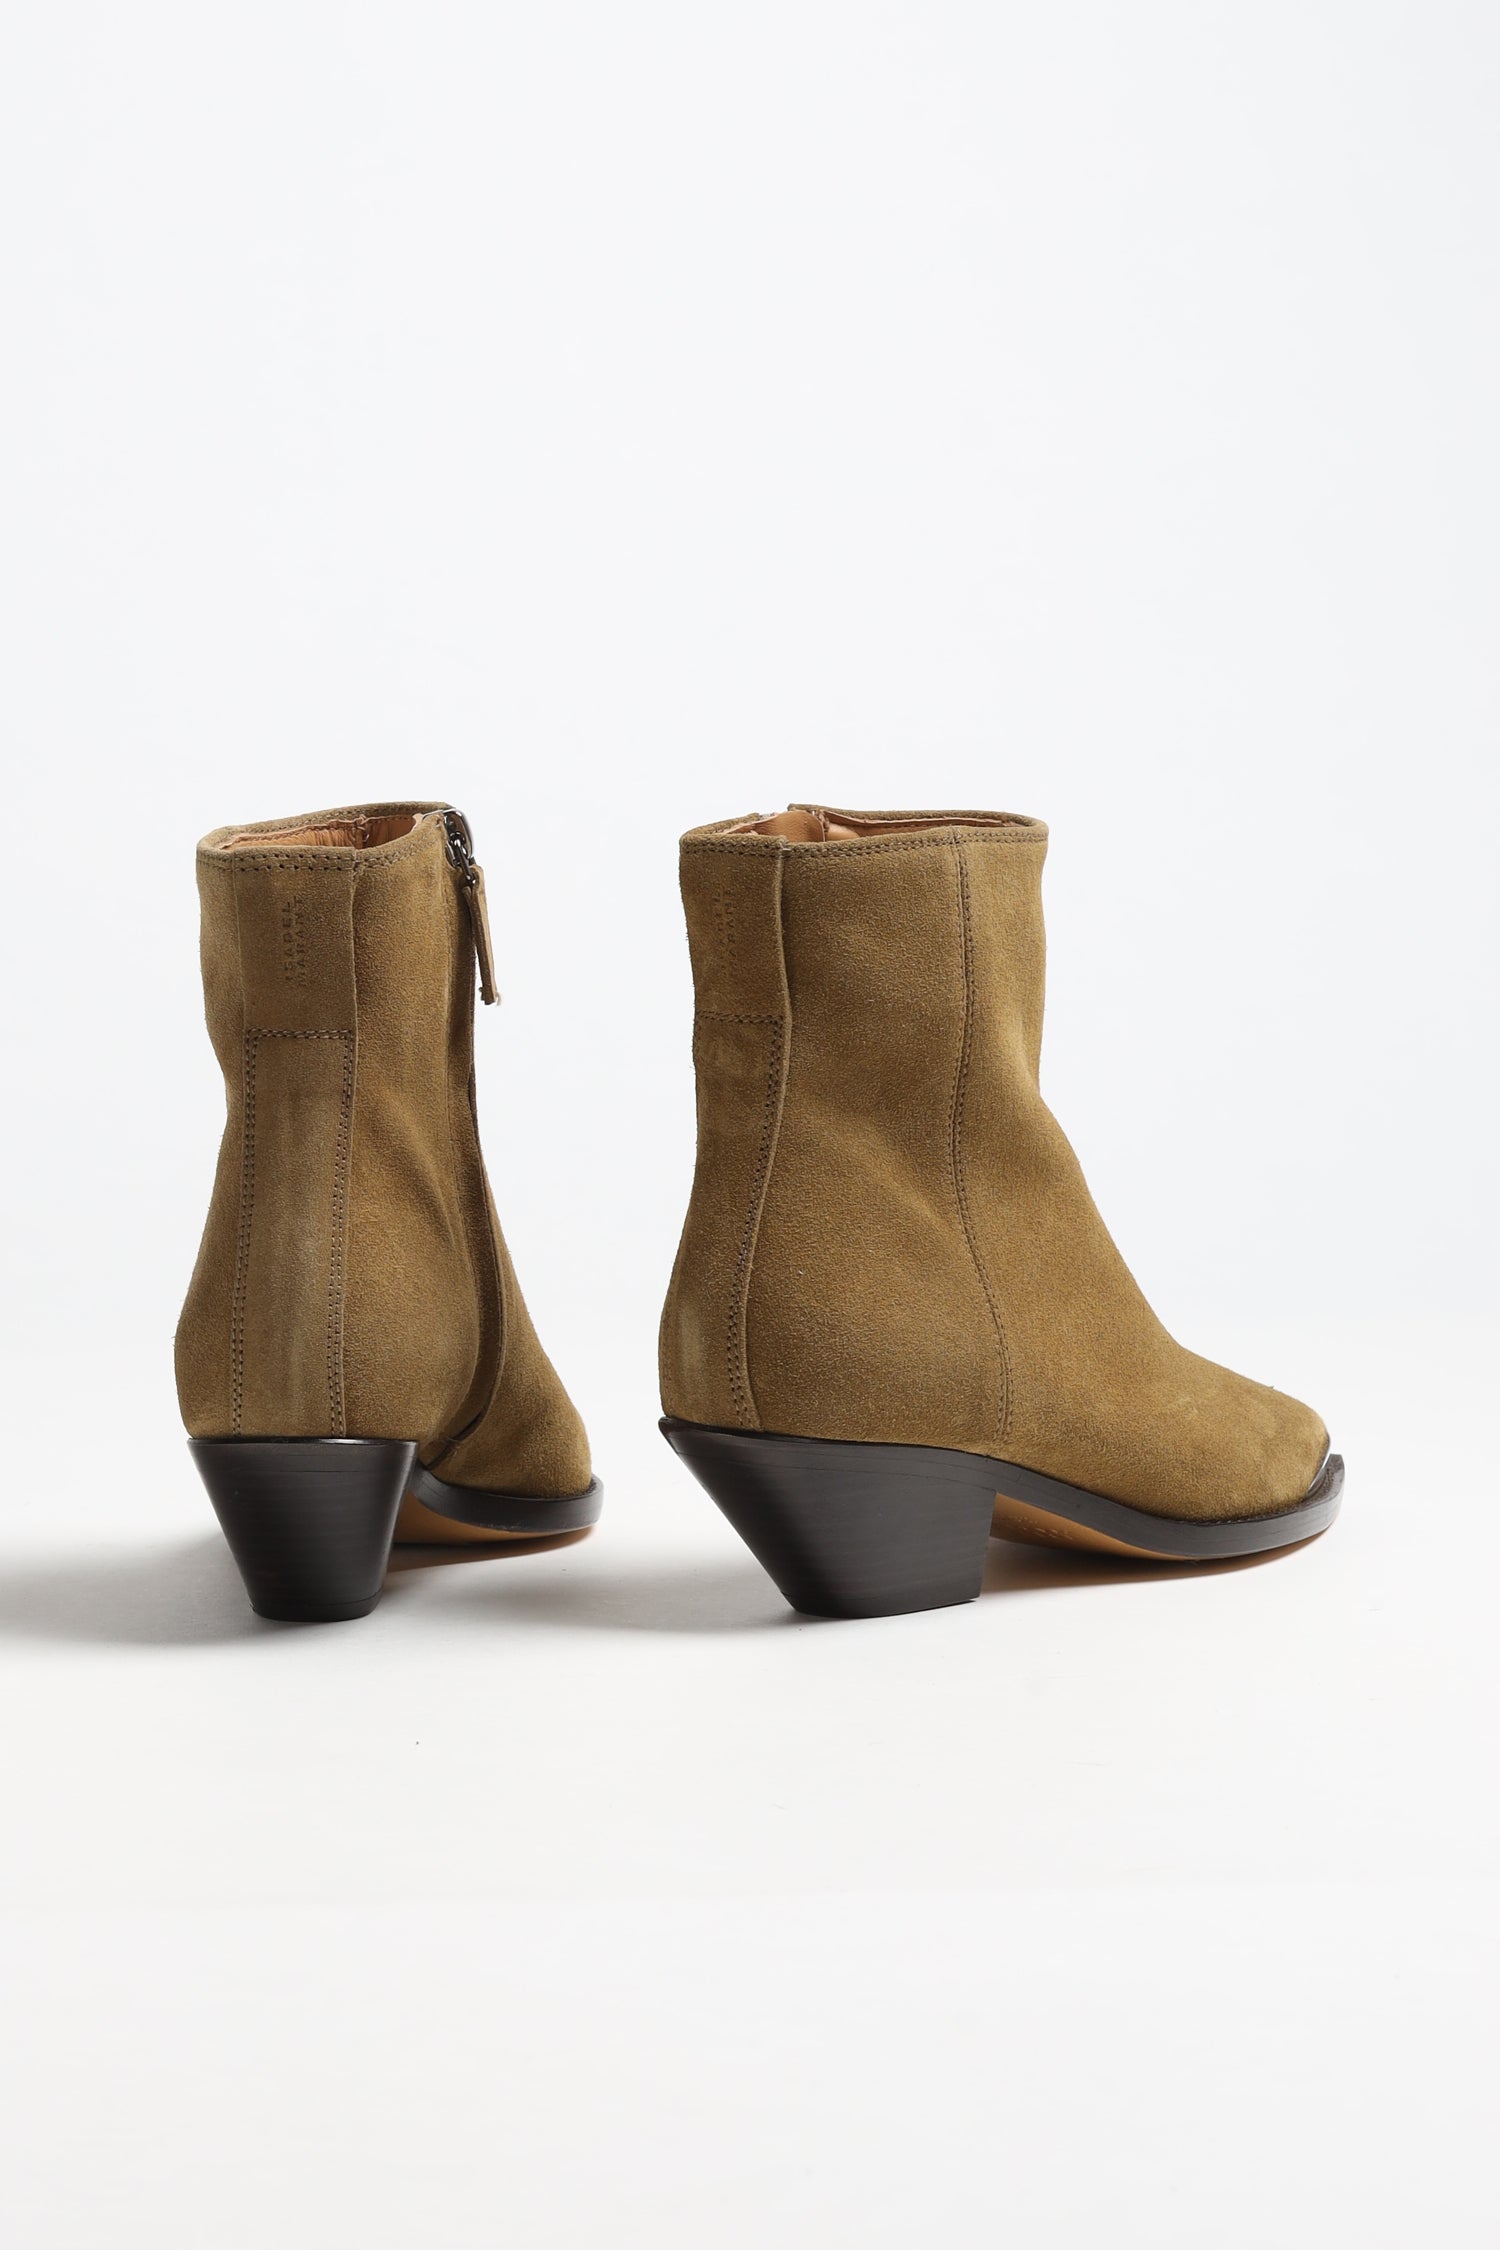 Boots Adnae Suede in TaupeIsabel Marant - Anita Hass